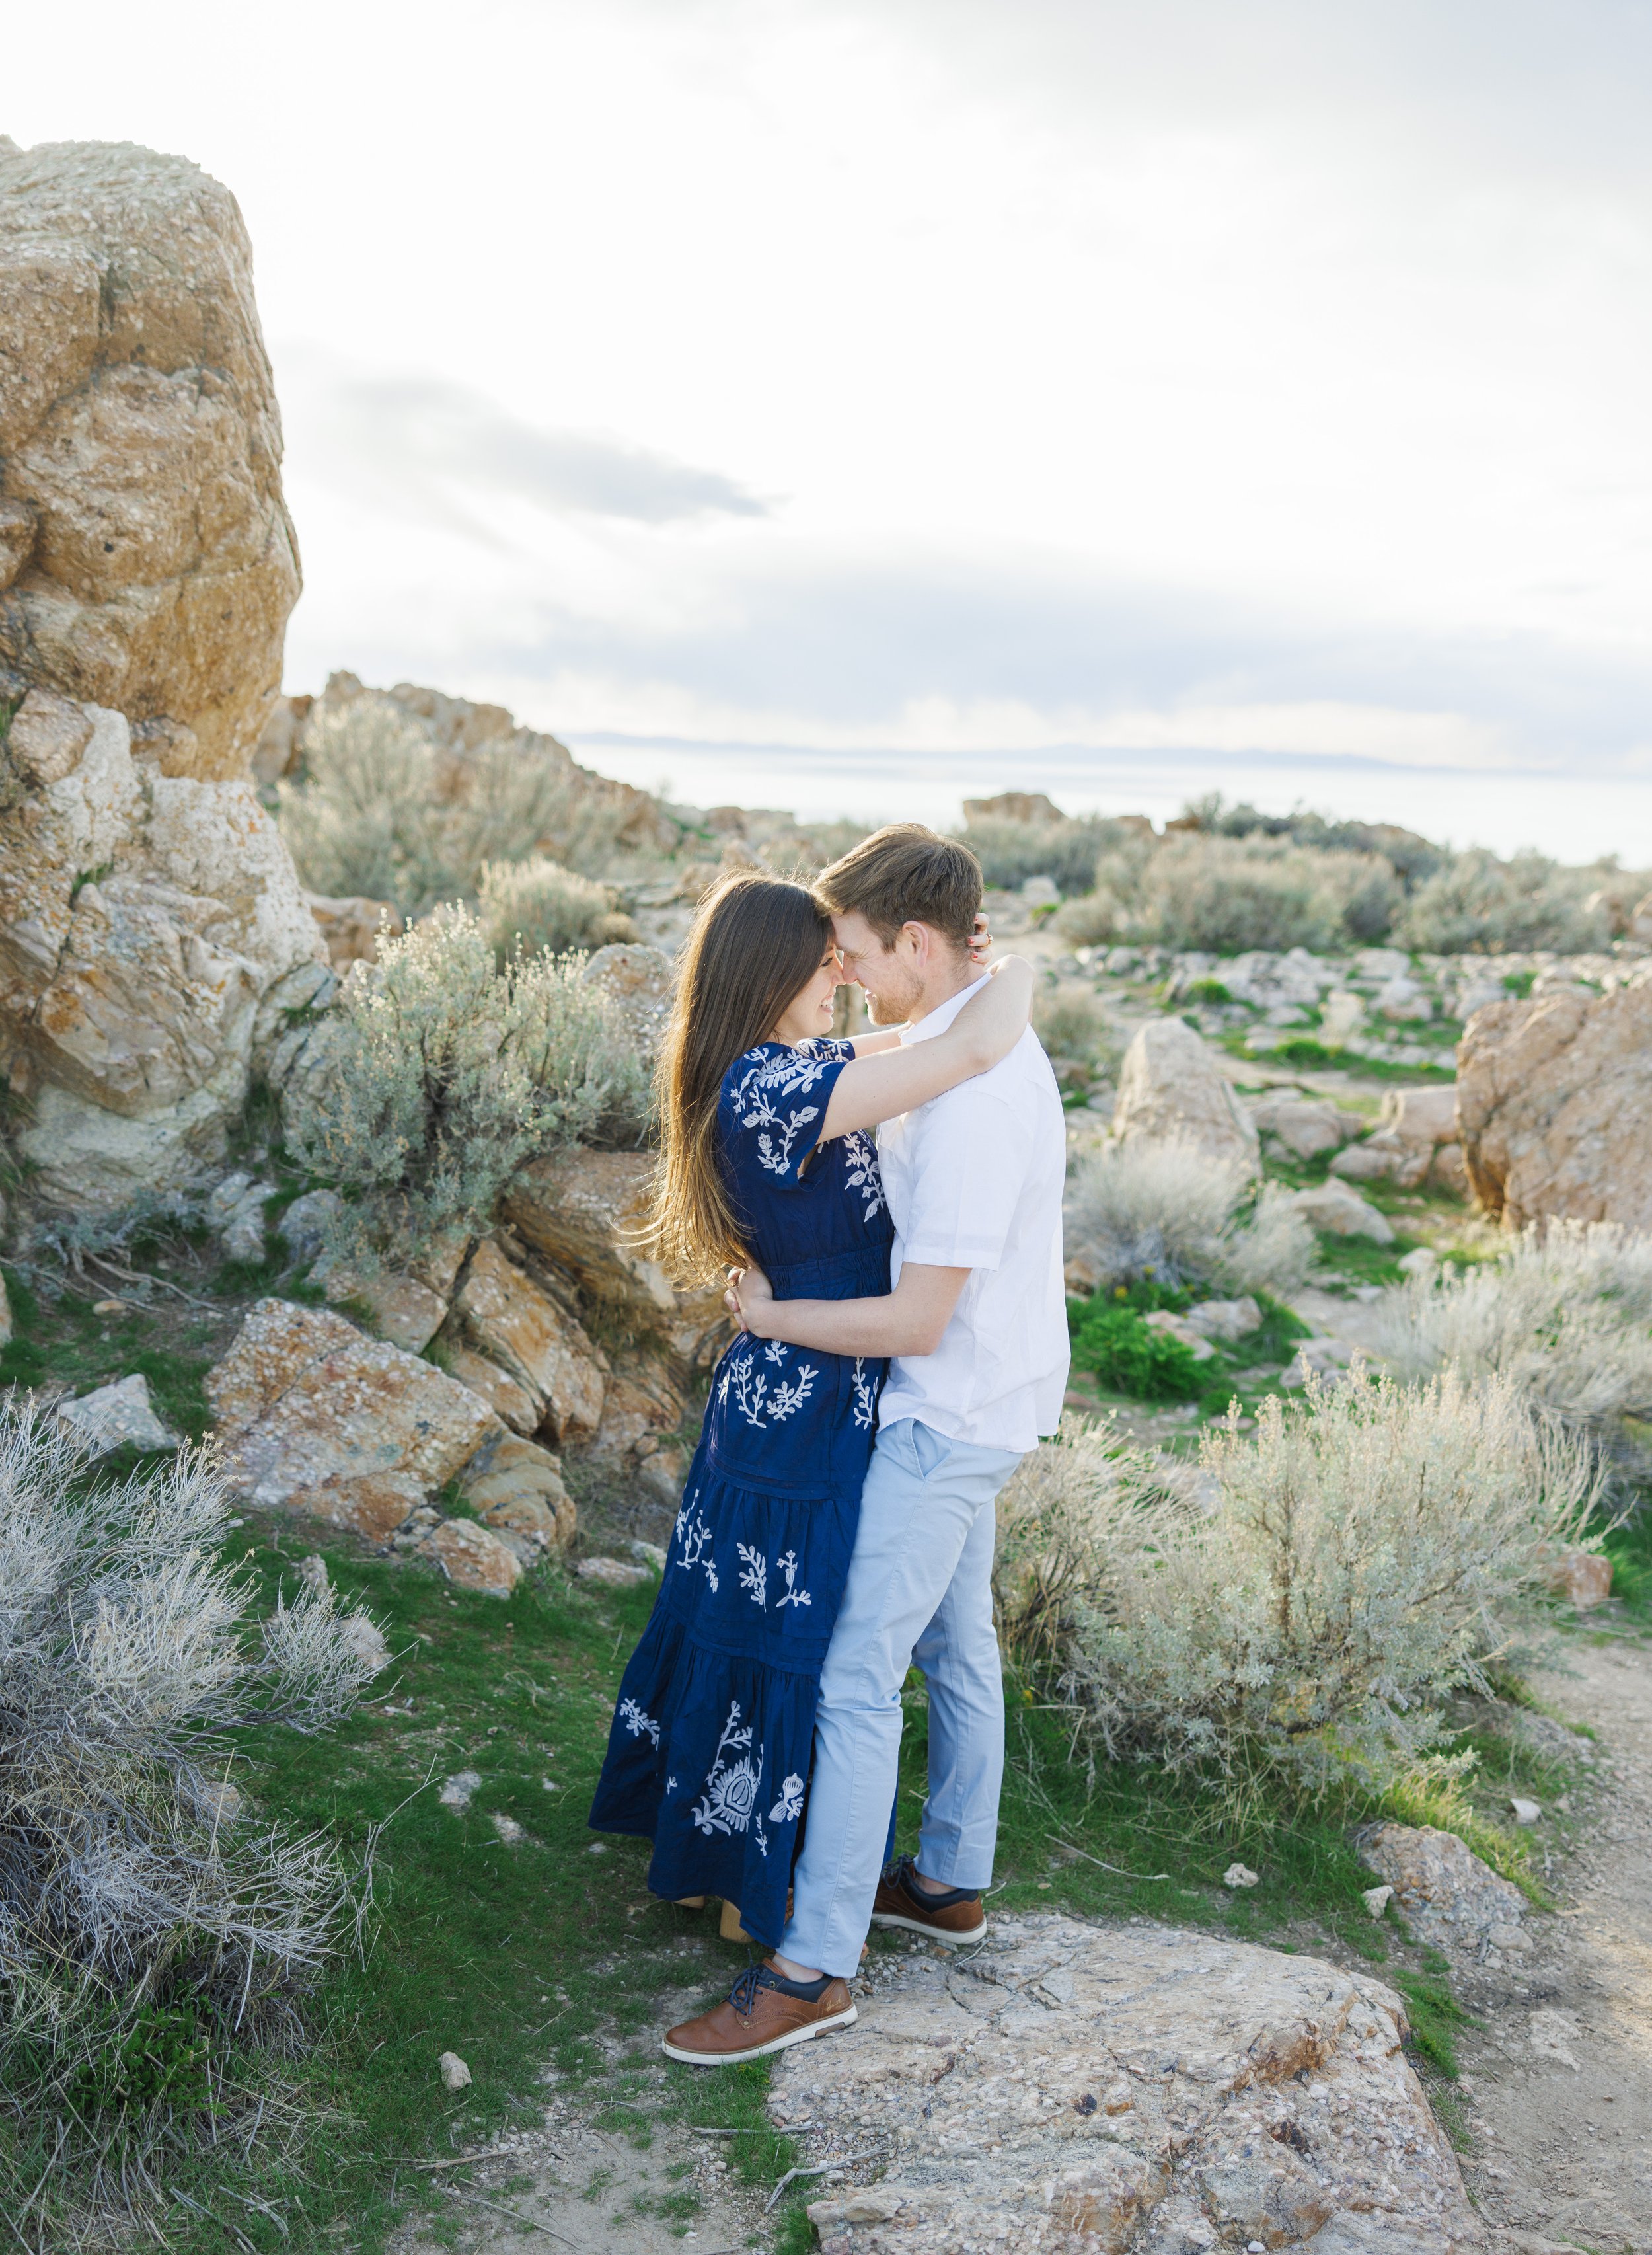  On a rocky mountain vista, a man and woman hug during an engagement session captured by Savanna Richardson Photography. engagement dreams spring engagement ideas #SavannaRichardsonPhotography #SavannaRichardsonEngagements #UtahEngagements #AntelopeI